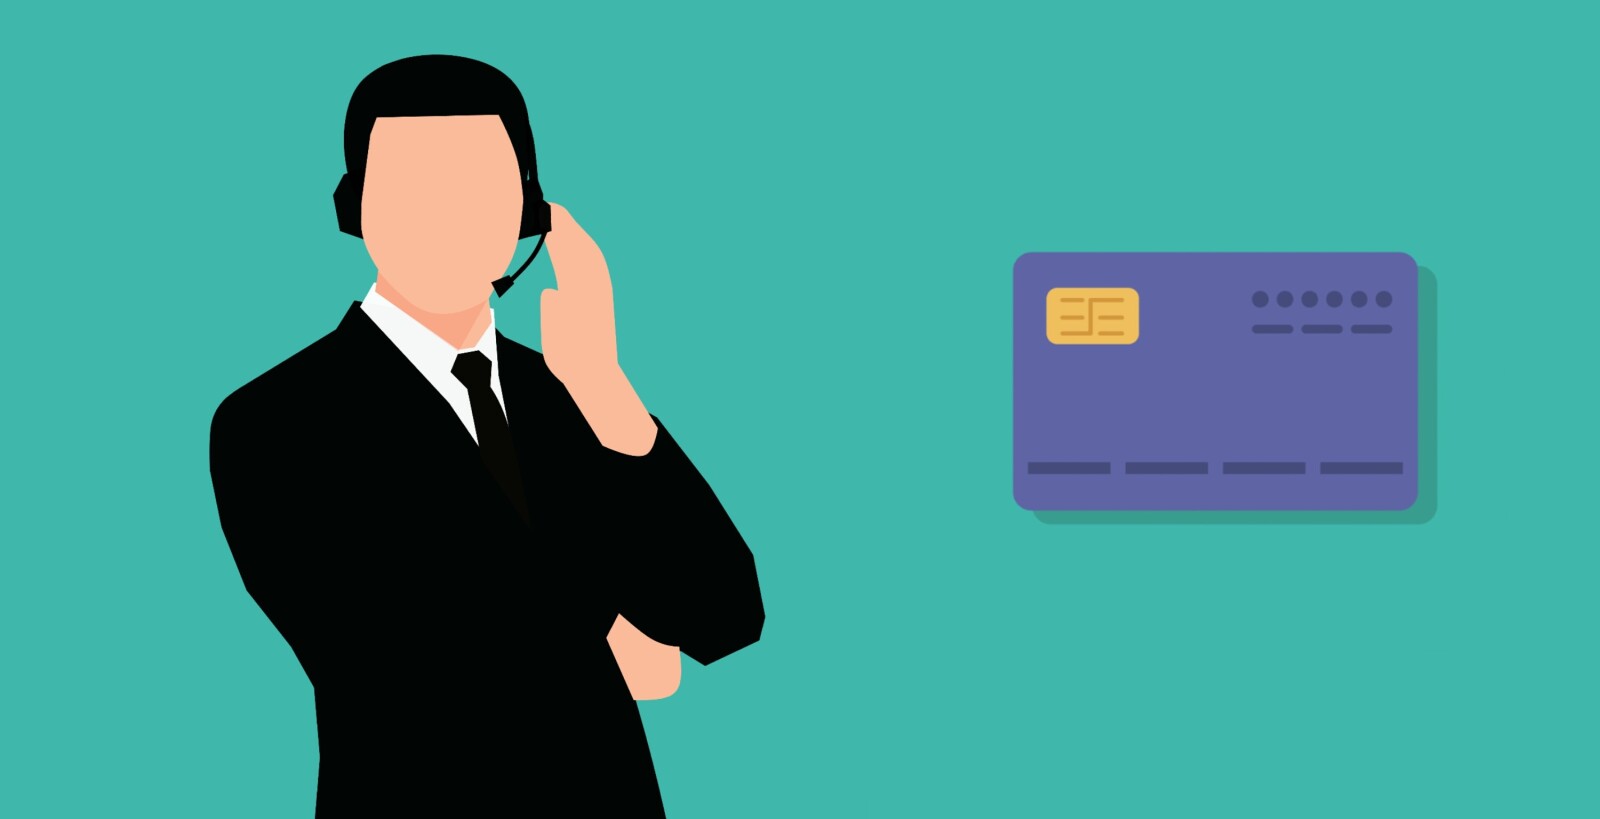 Late Payment Penalties on Debit Cards: What Consumers Should Know